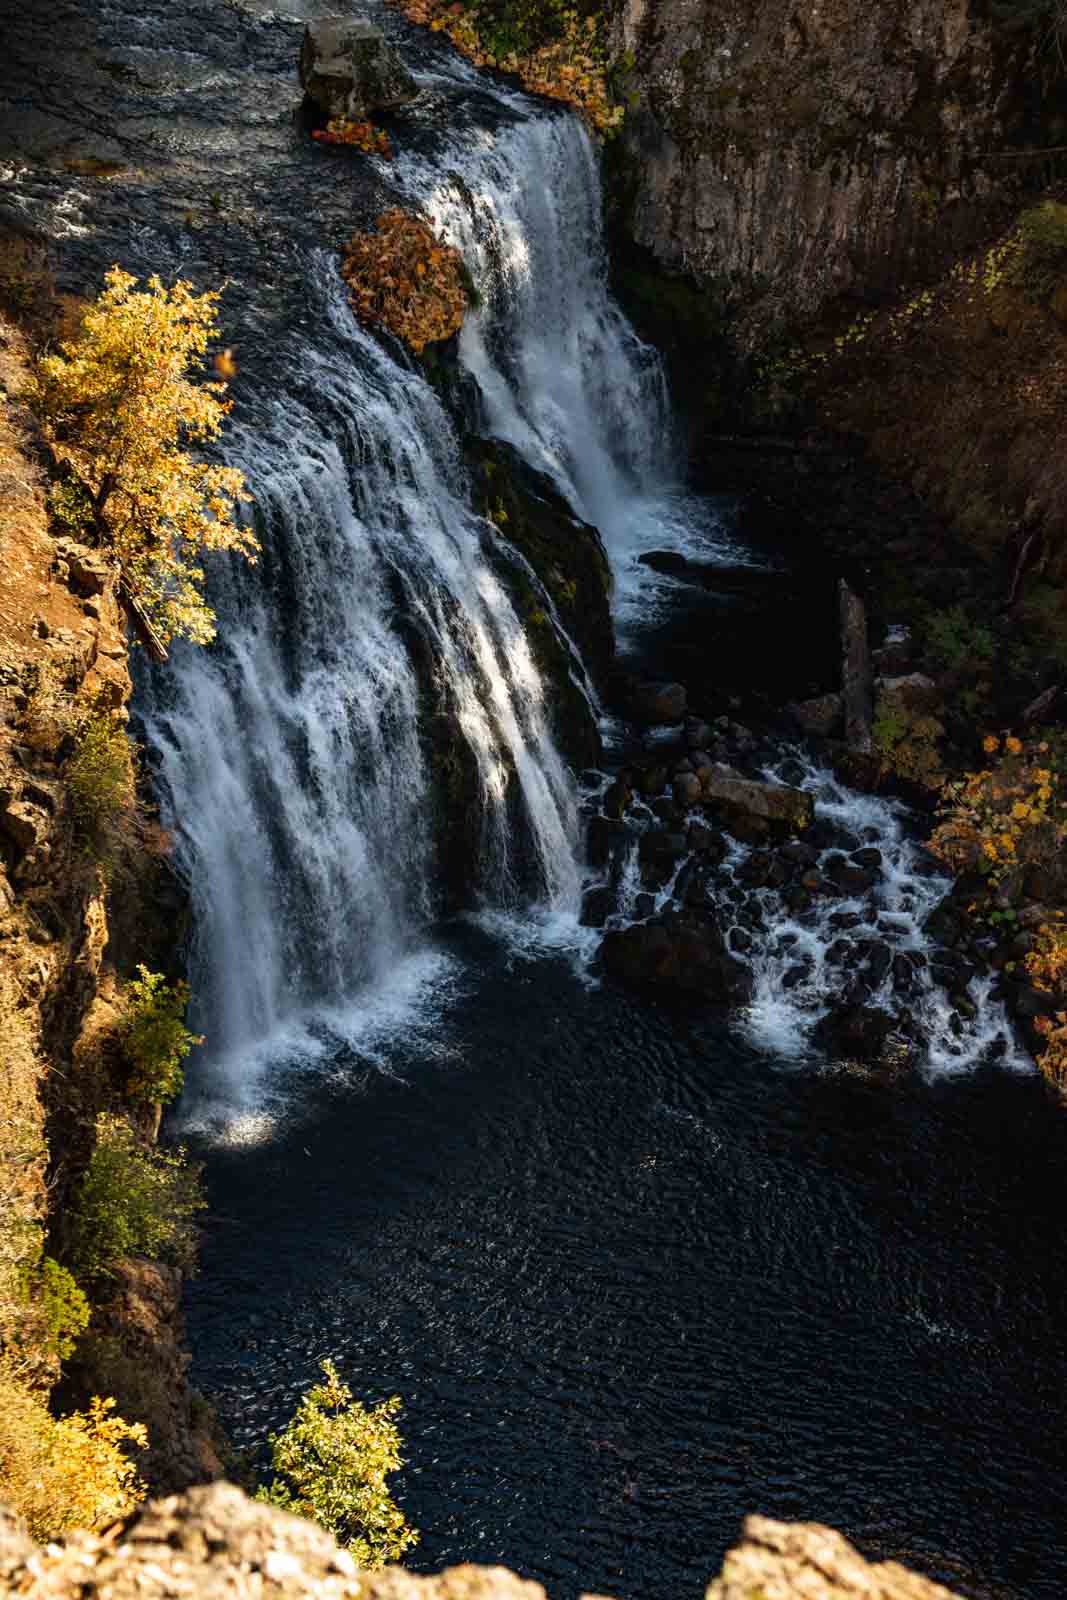 McCloud Falls is a must on your Northern California road trip